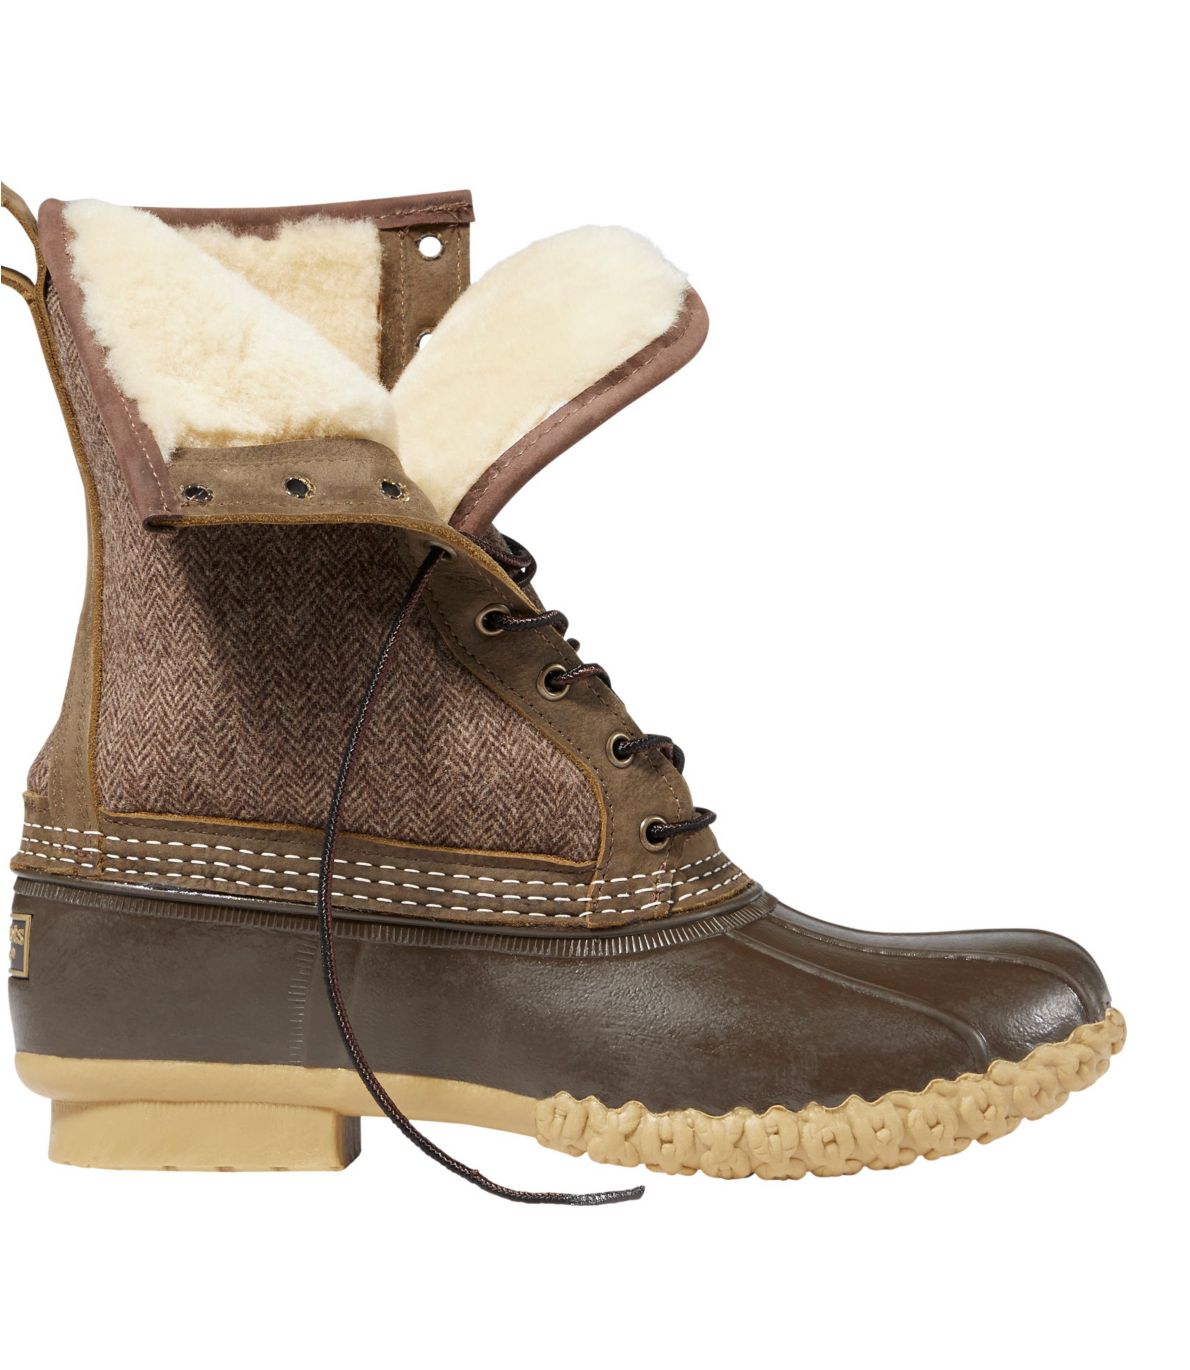 Men's Bean Boot, 10" Shearling-Lined